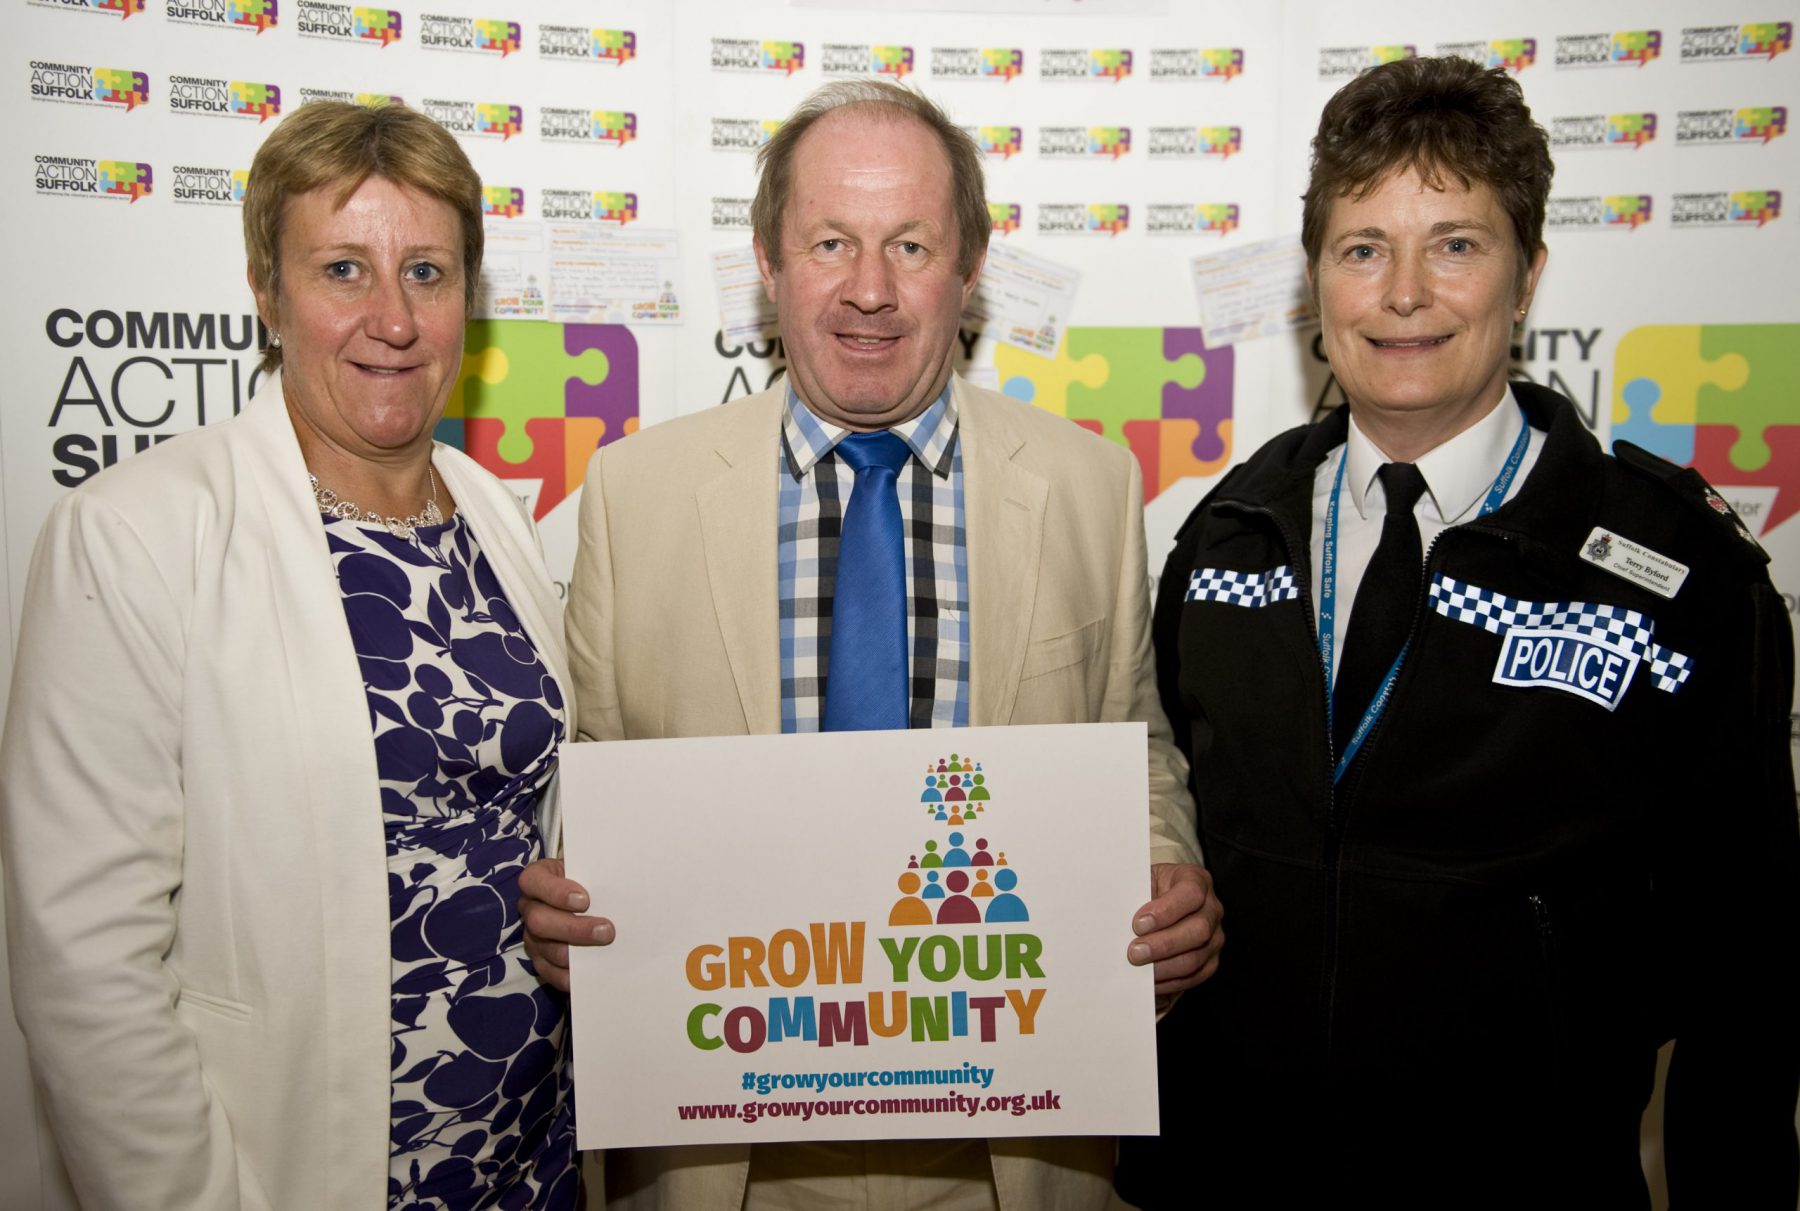 Support for the campaign at the Grow Your Community conference on Friday 25 September 2015. (above L-R) Chris Abraham, Deputy Chief Executive, Community Action Suffolk Tim Passmore, Police and Crime Commissioner for Suffolk Constabulary Chief Superintendent Terry Byford, Suffolk Constabulary.